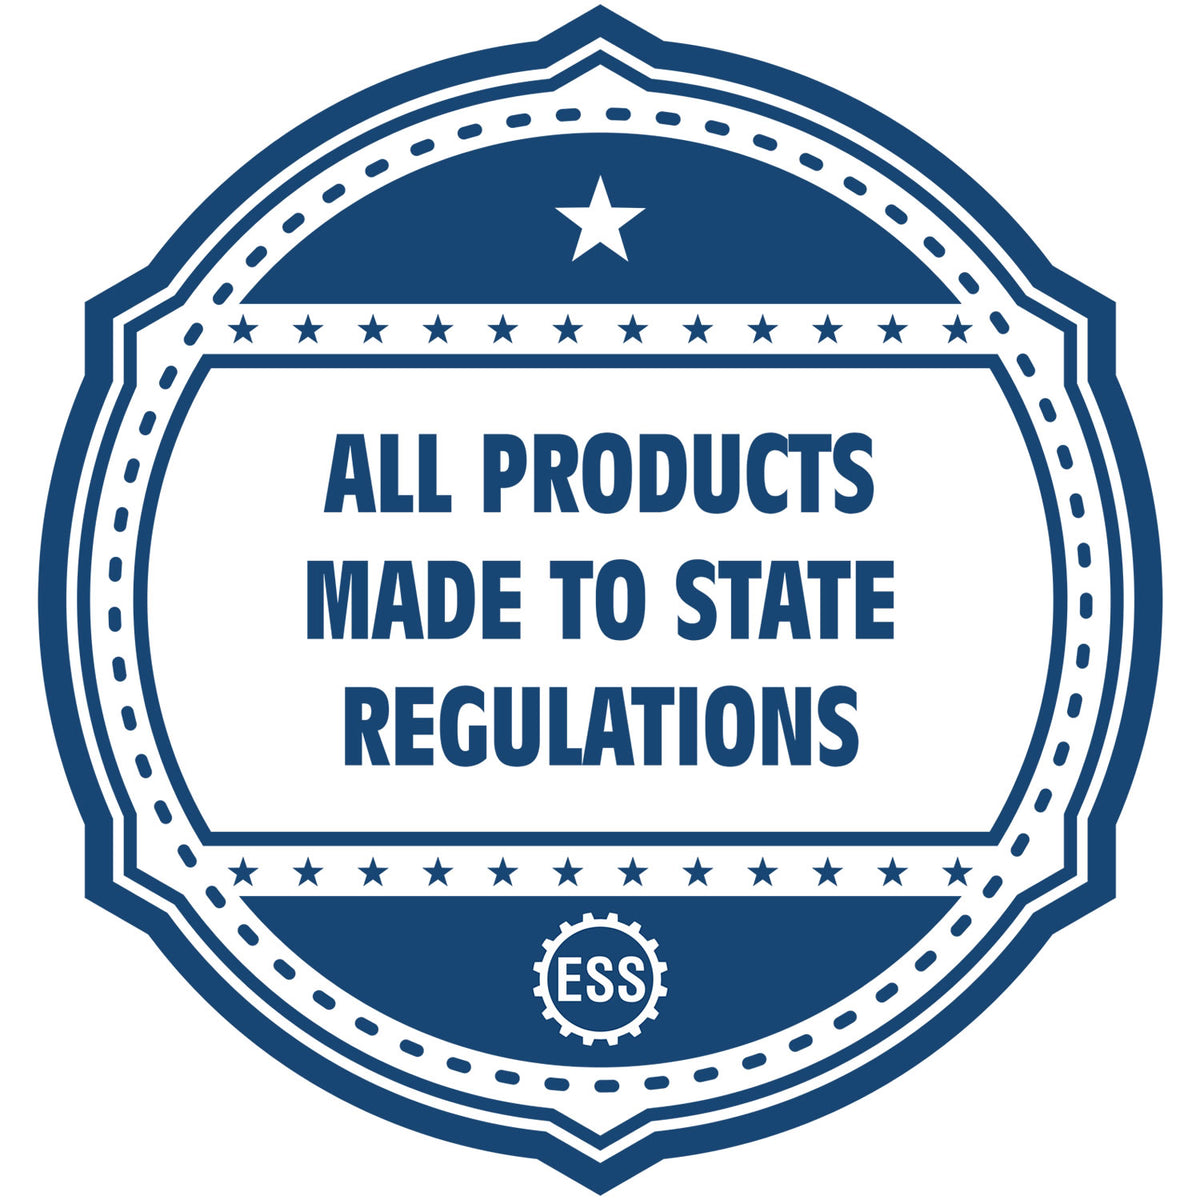 An icon or badge element for the Self-Inking South Dakota Landscape Architect Stamp showing that this product is made in compliance with state regulations.